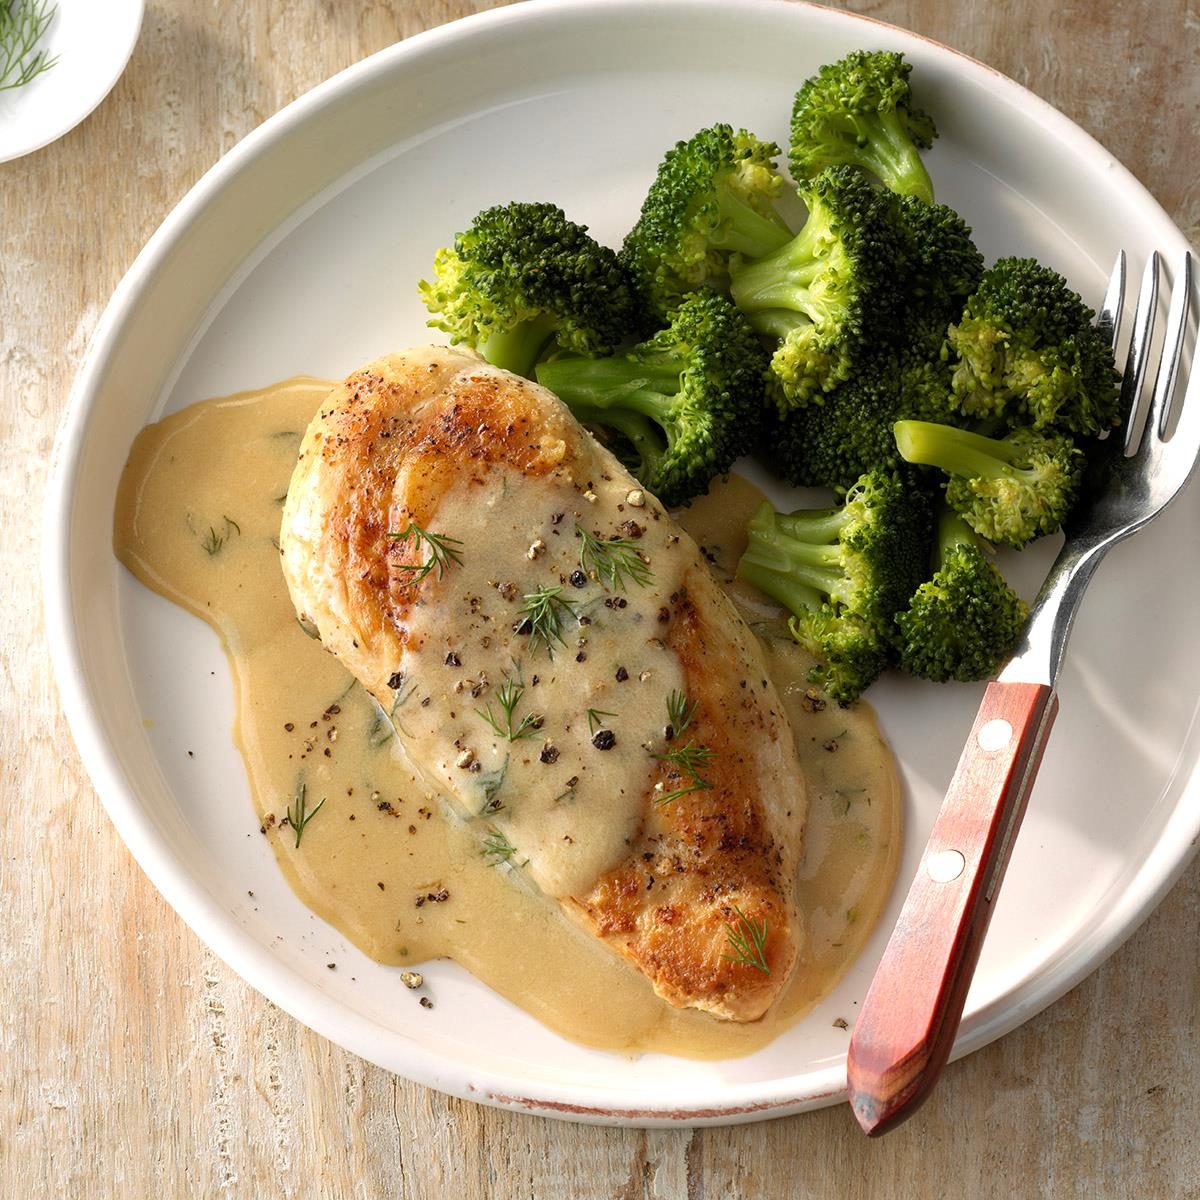 Chicken And Broccoli With Dill Sauce Exps Sdam18 200154 C12 01 4b 8